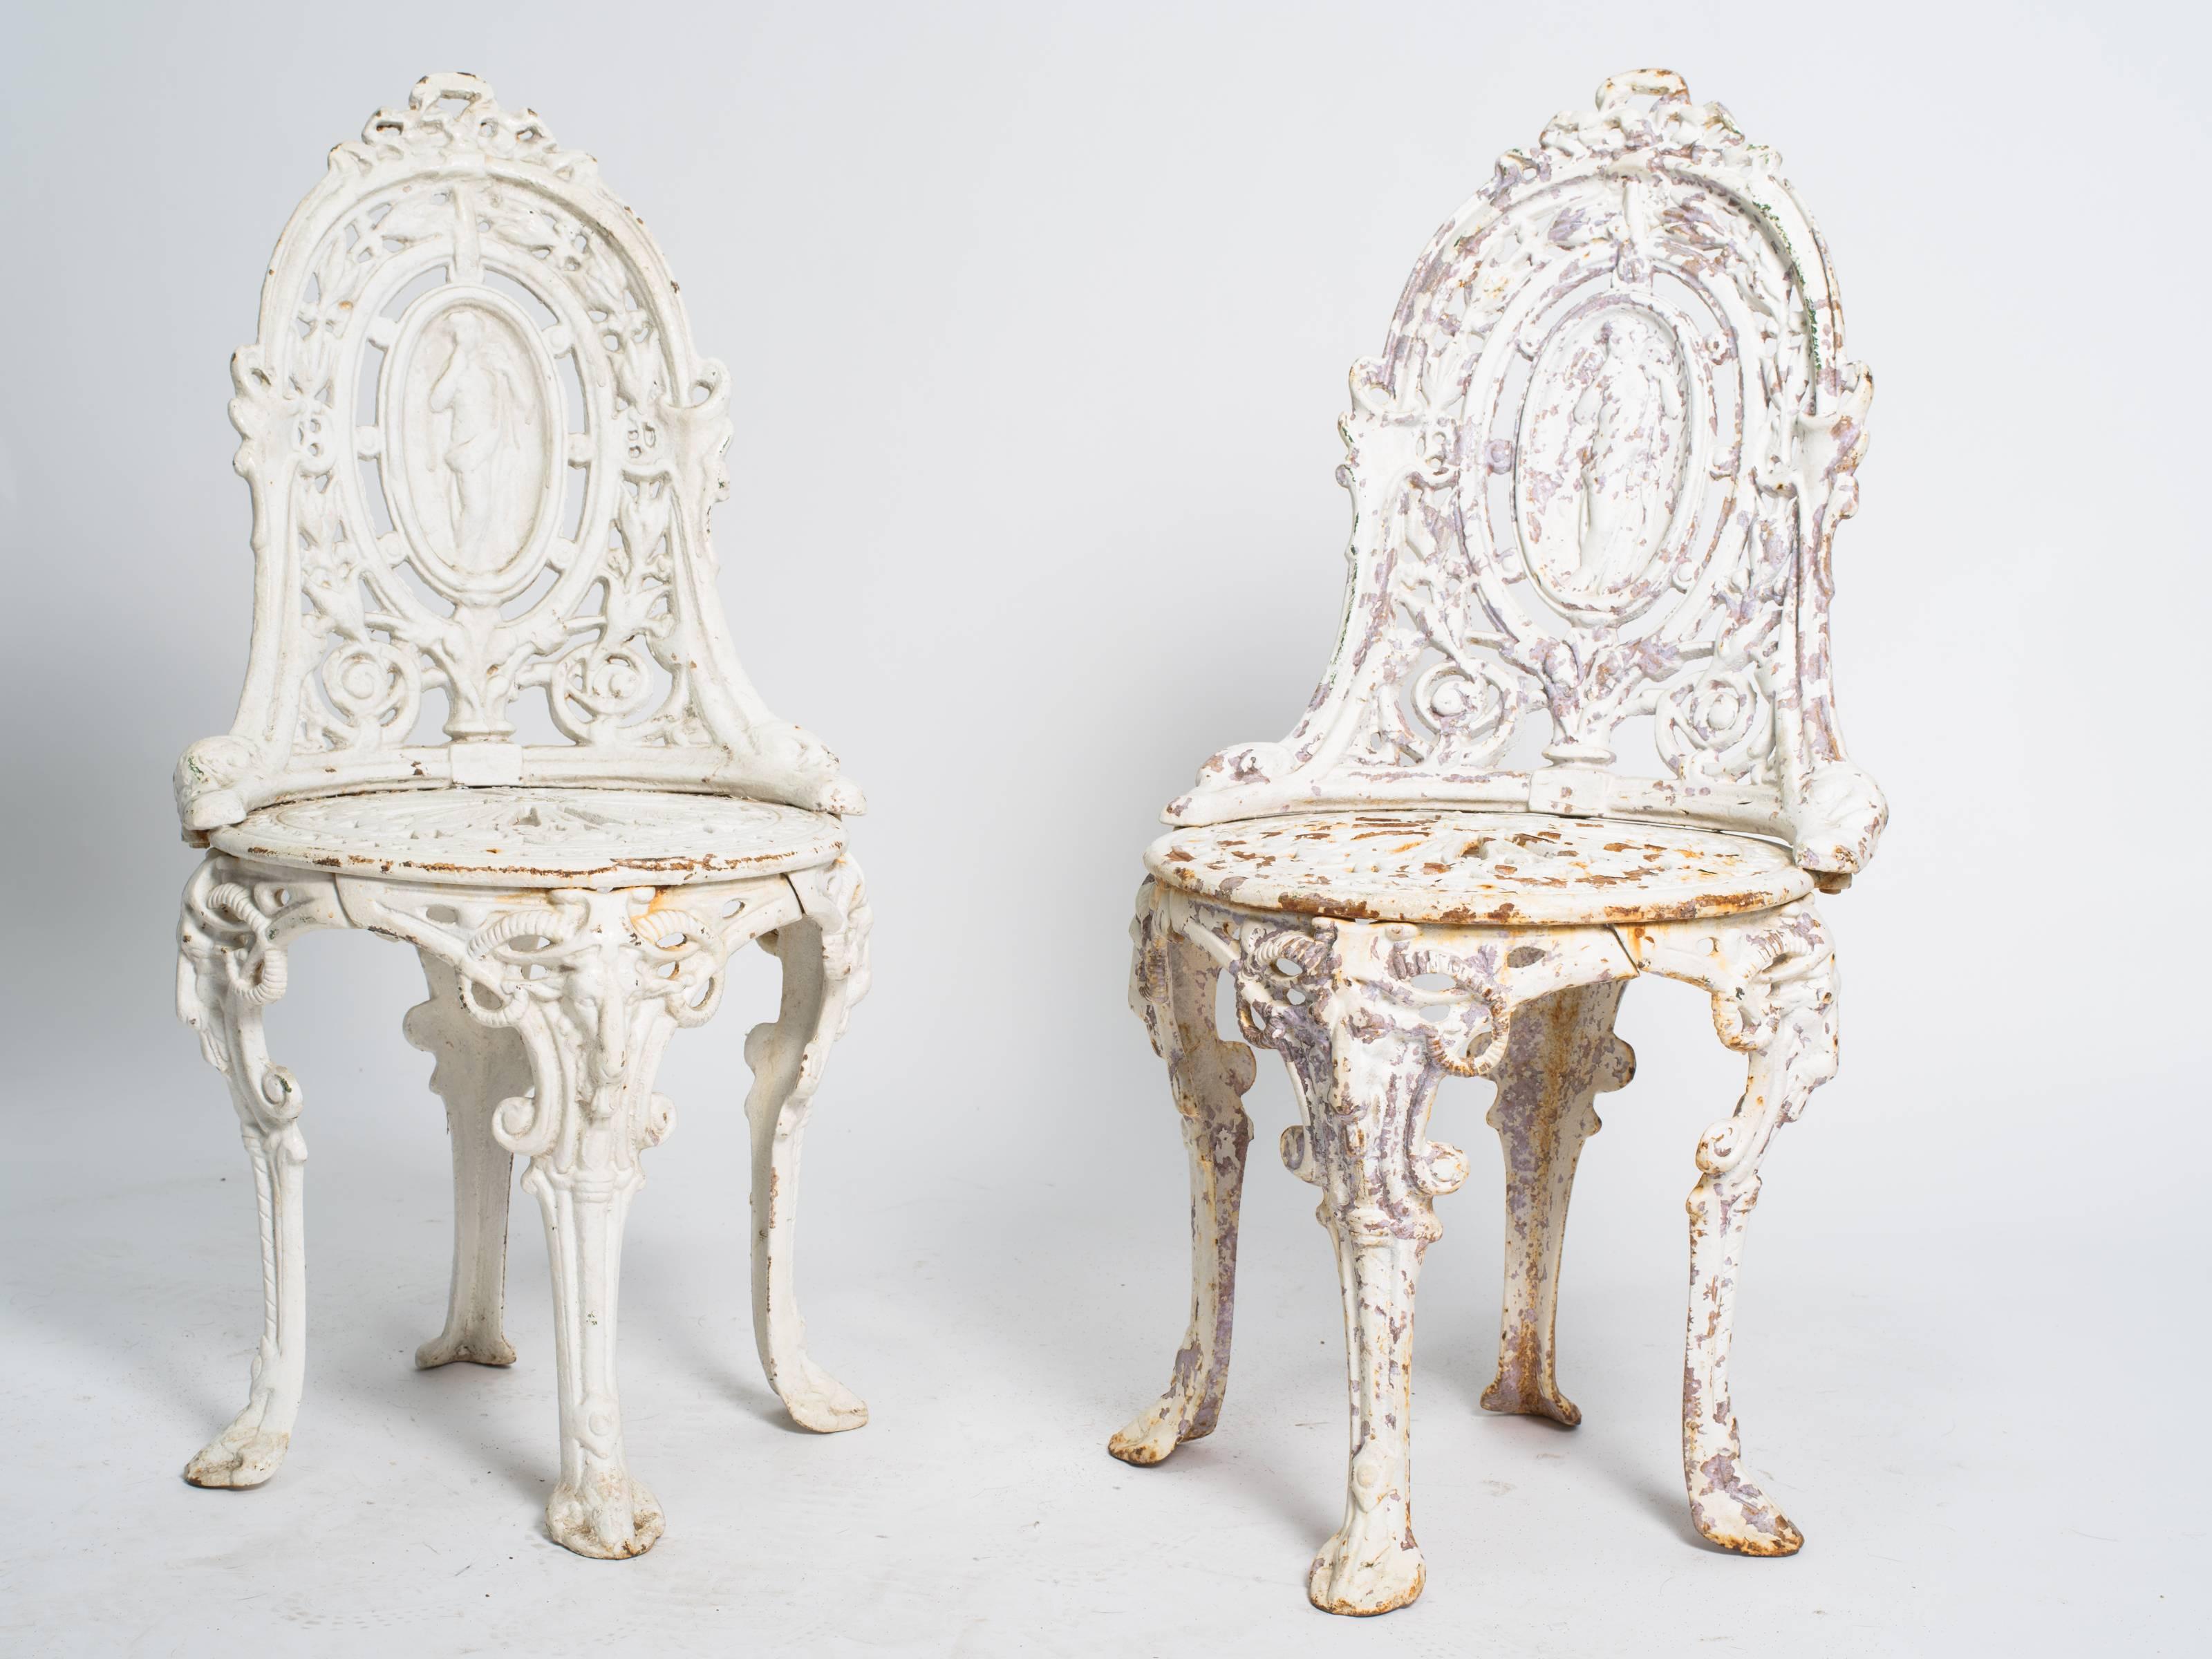 Early 20th century English garden chairs. Made of cast iron with some paint loss. We have three available.